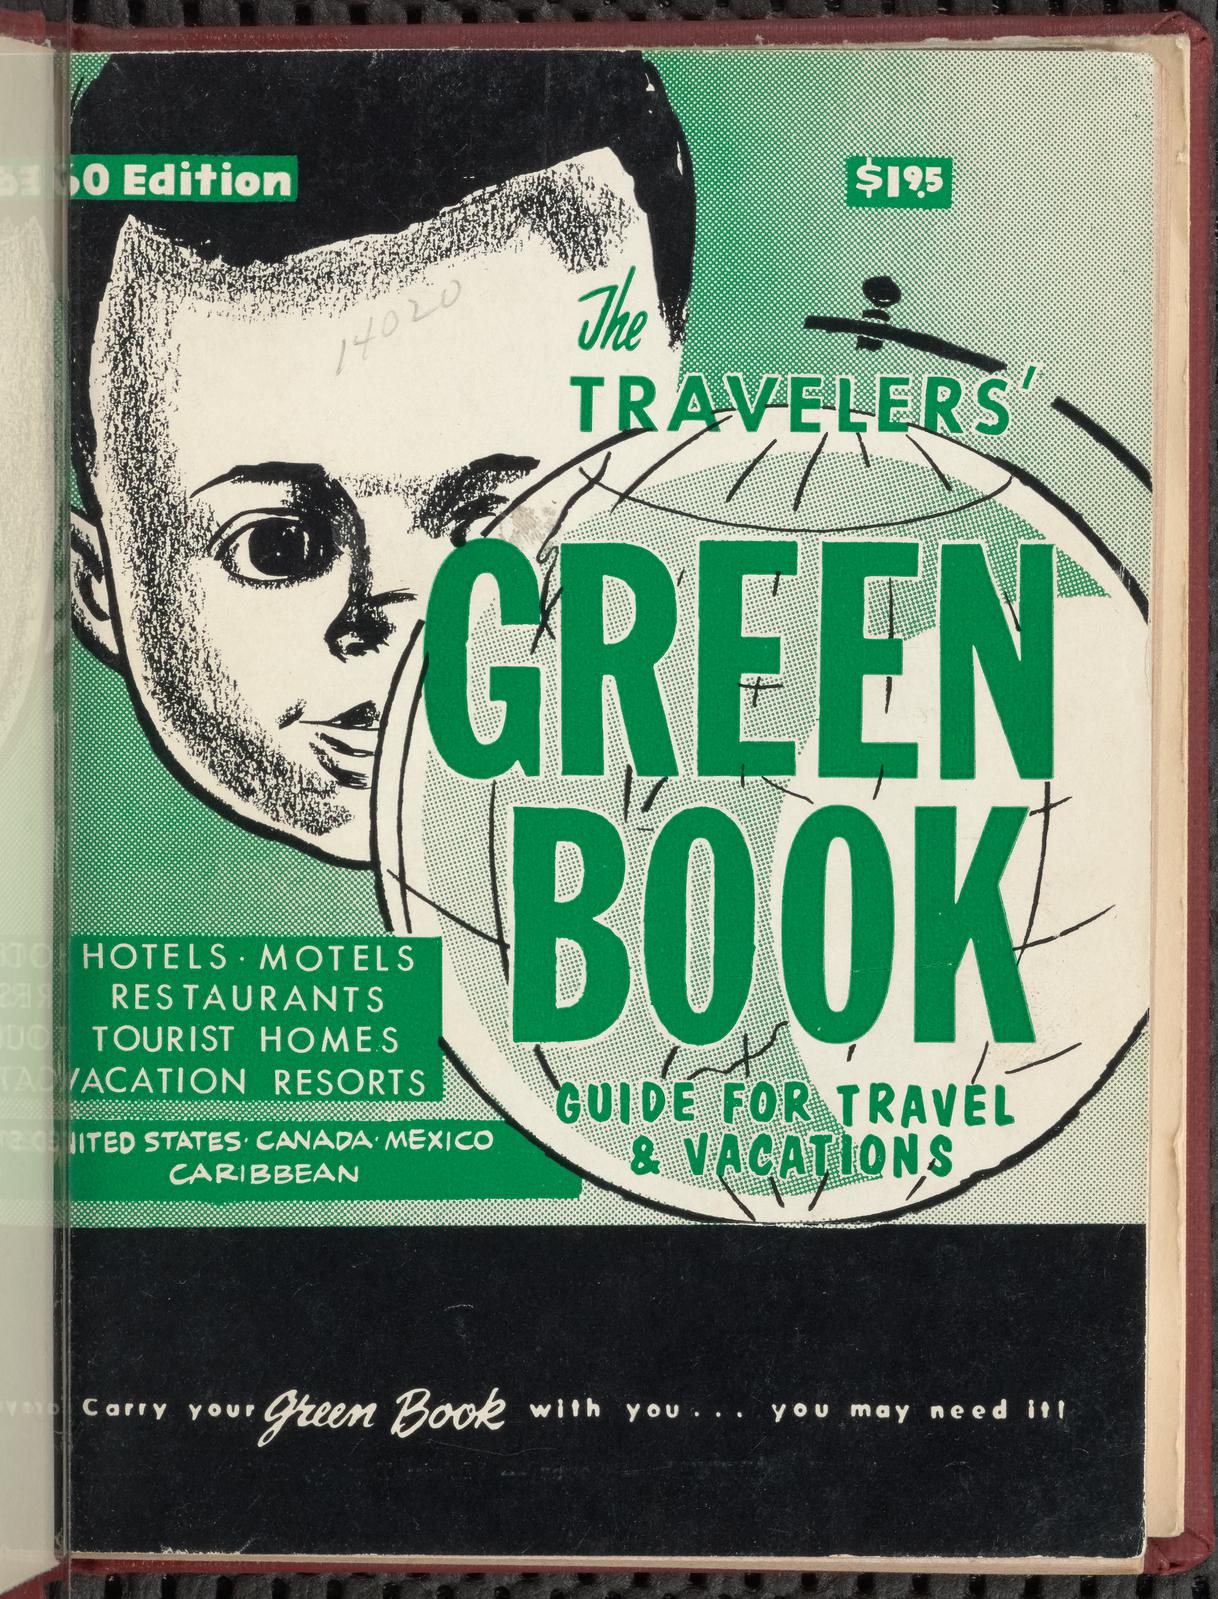 How The Green Book Guided Black Travelers Across Texas And Beyond